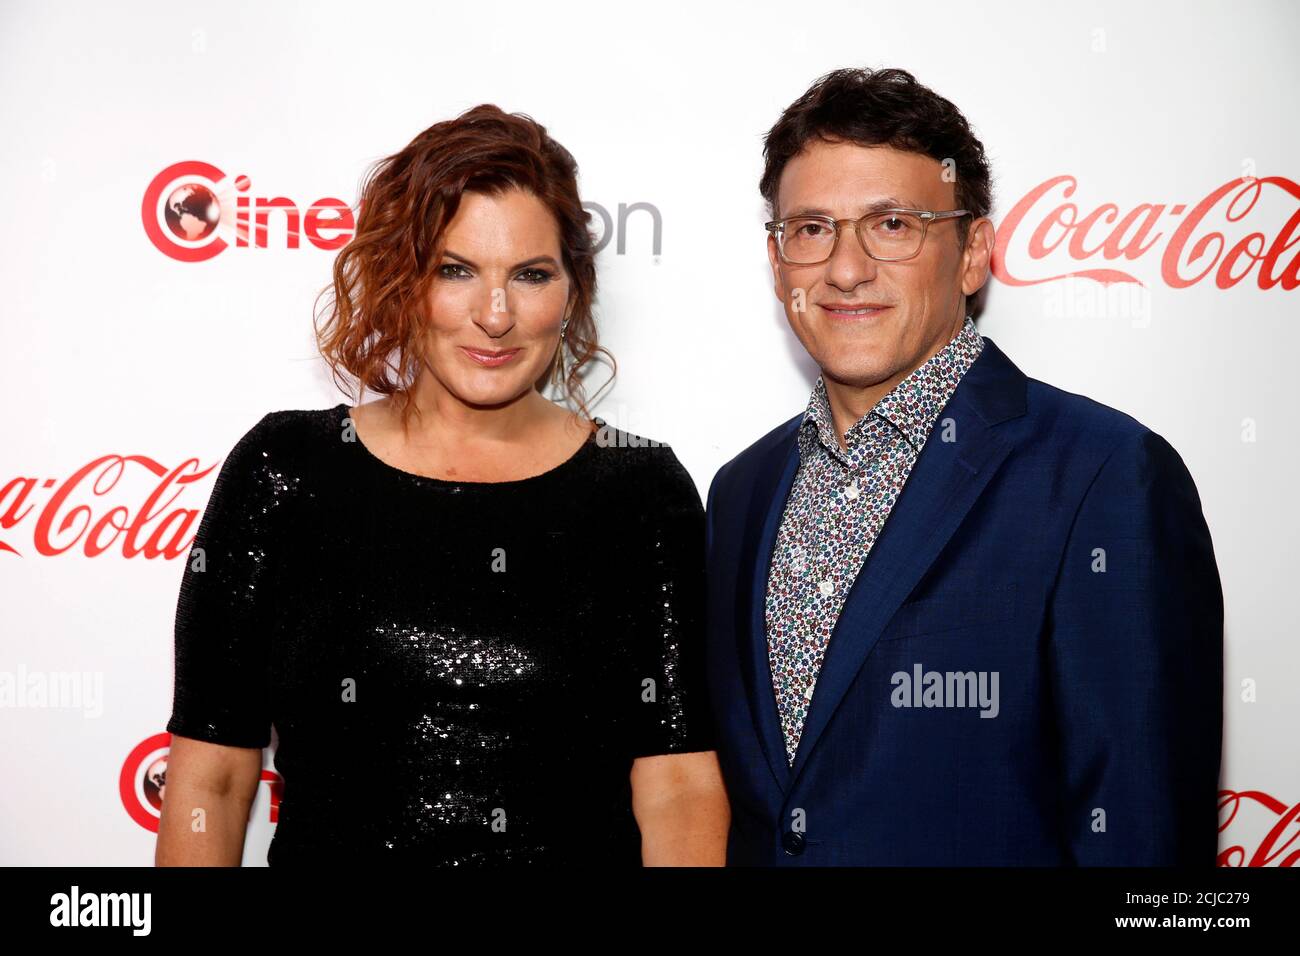 Director Anthony Russo poses with his wife actress Ann Russo during the CinemaCon Big Screen Achievement